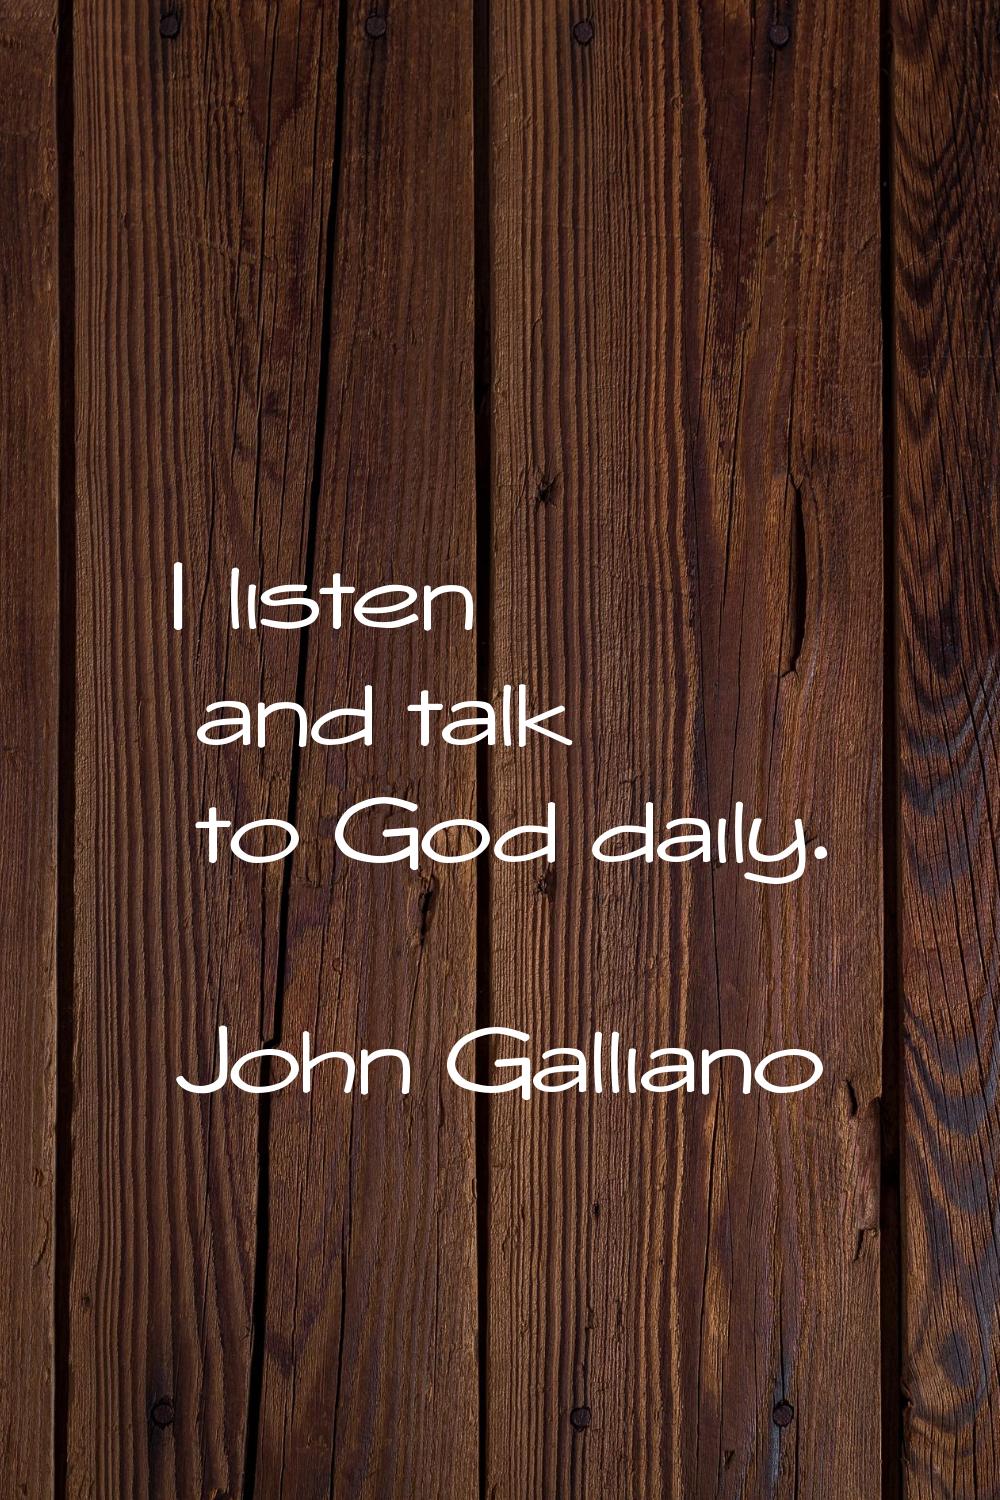 I listen and talk to God daily.